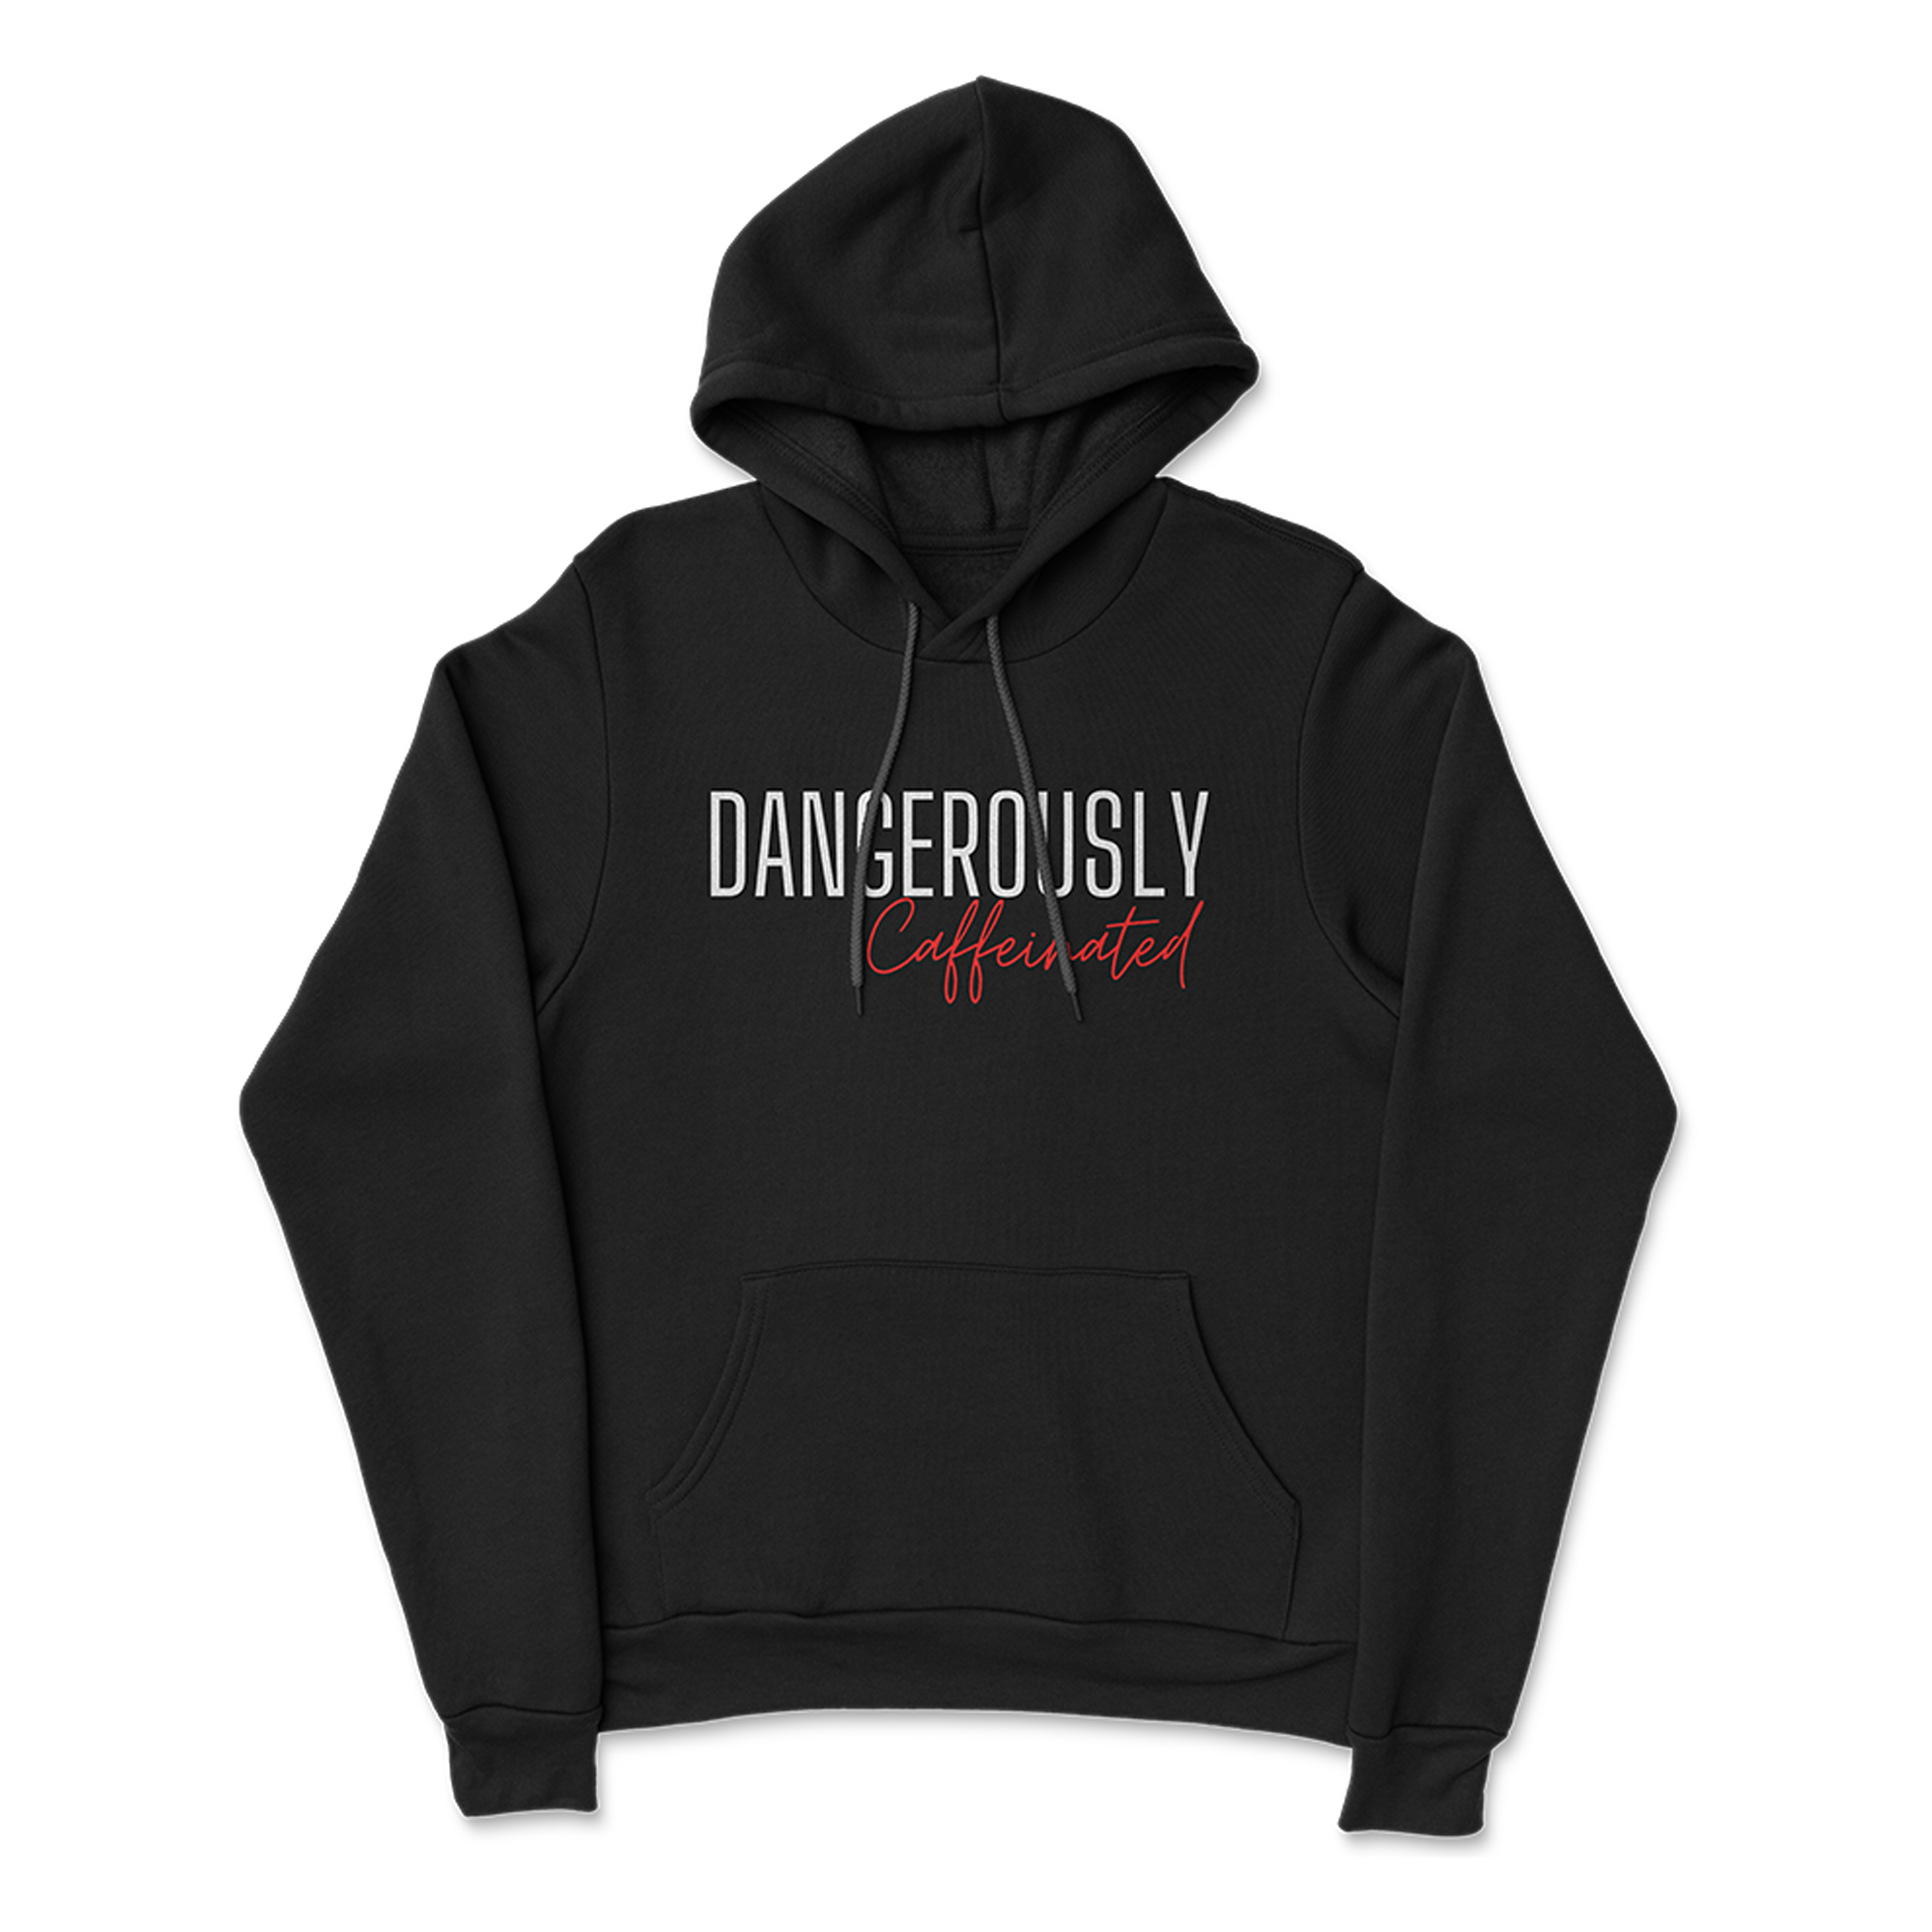 Kevin Cooney - Dangerously Caffeinated Hoodie